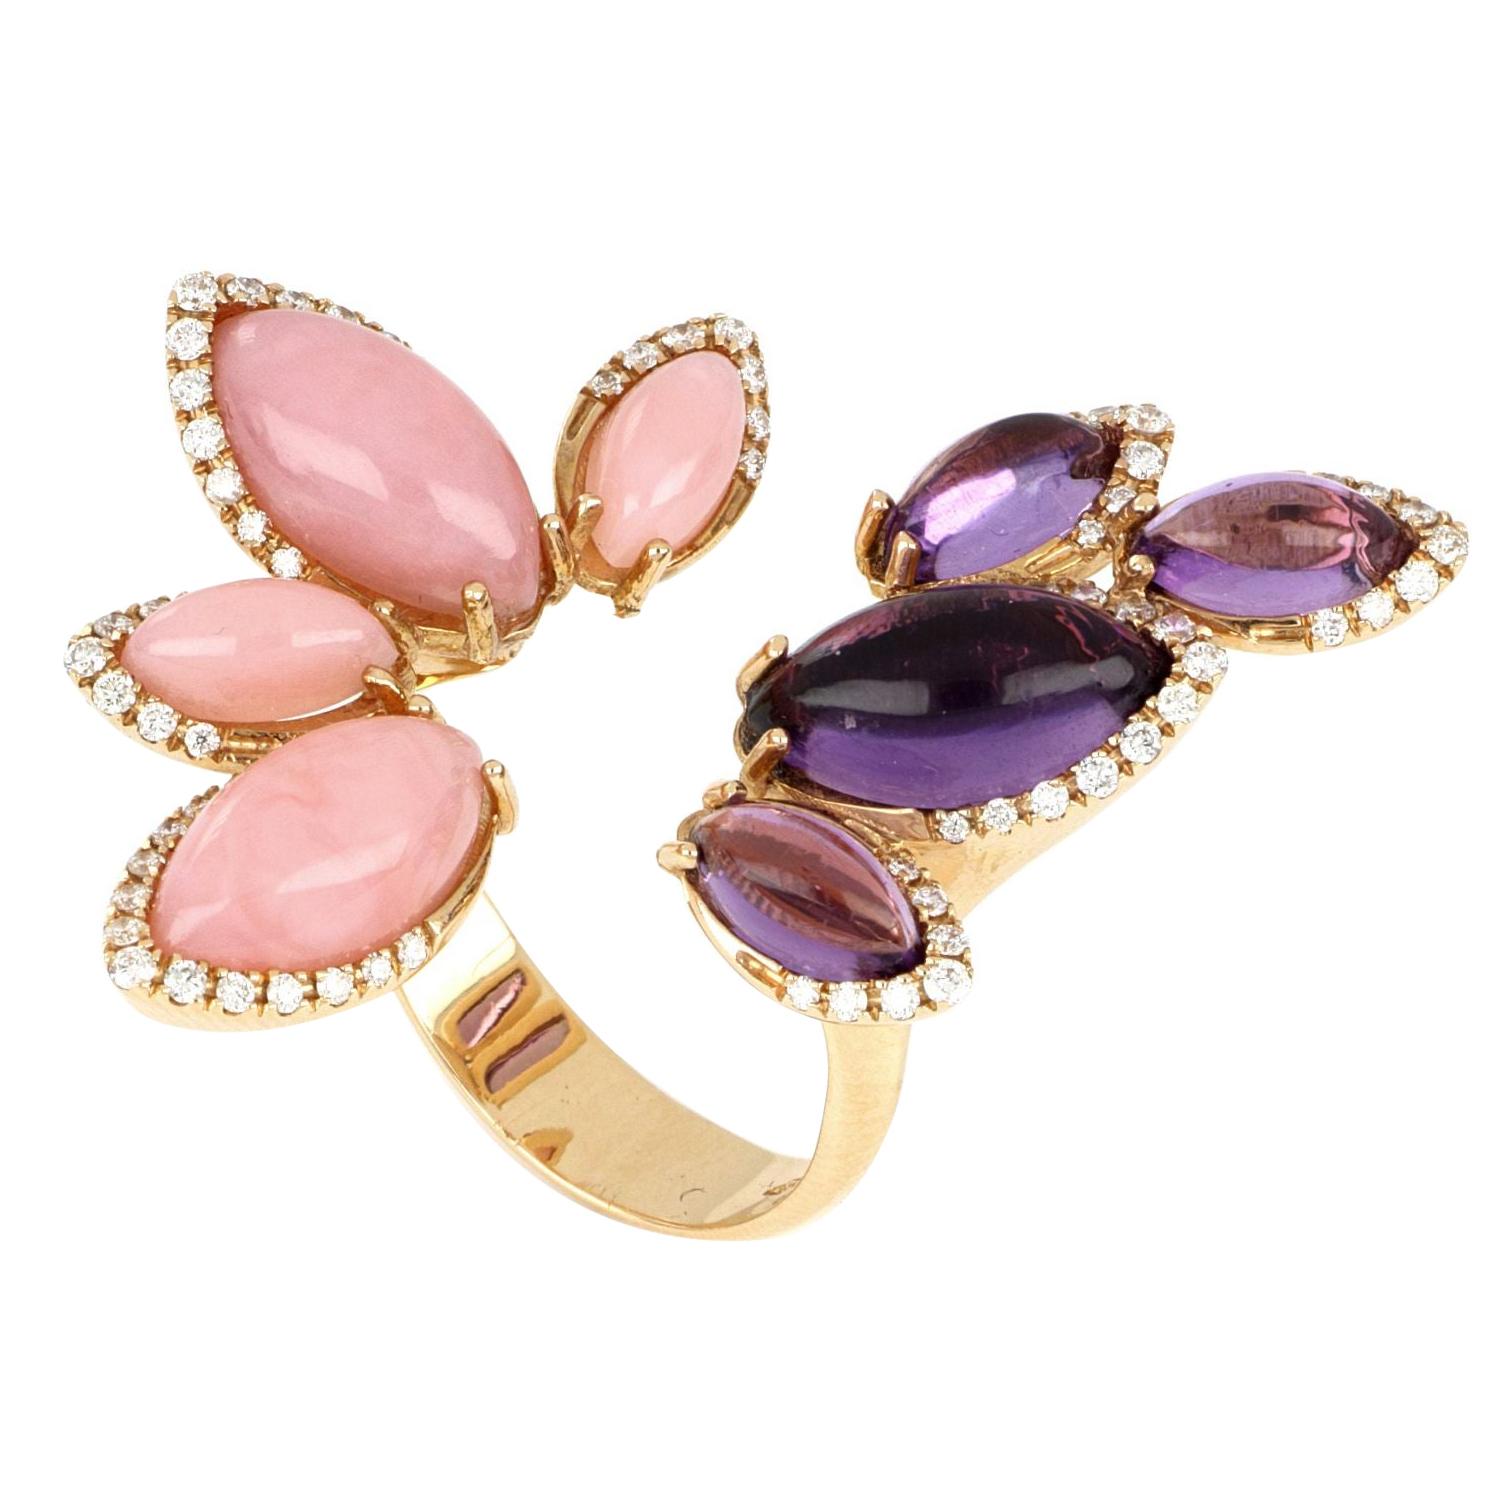 For Sale:  18kt Rose Gold Les Papillons Ring with Pink Opal, Purple Amethyst and Diamonds